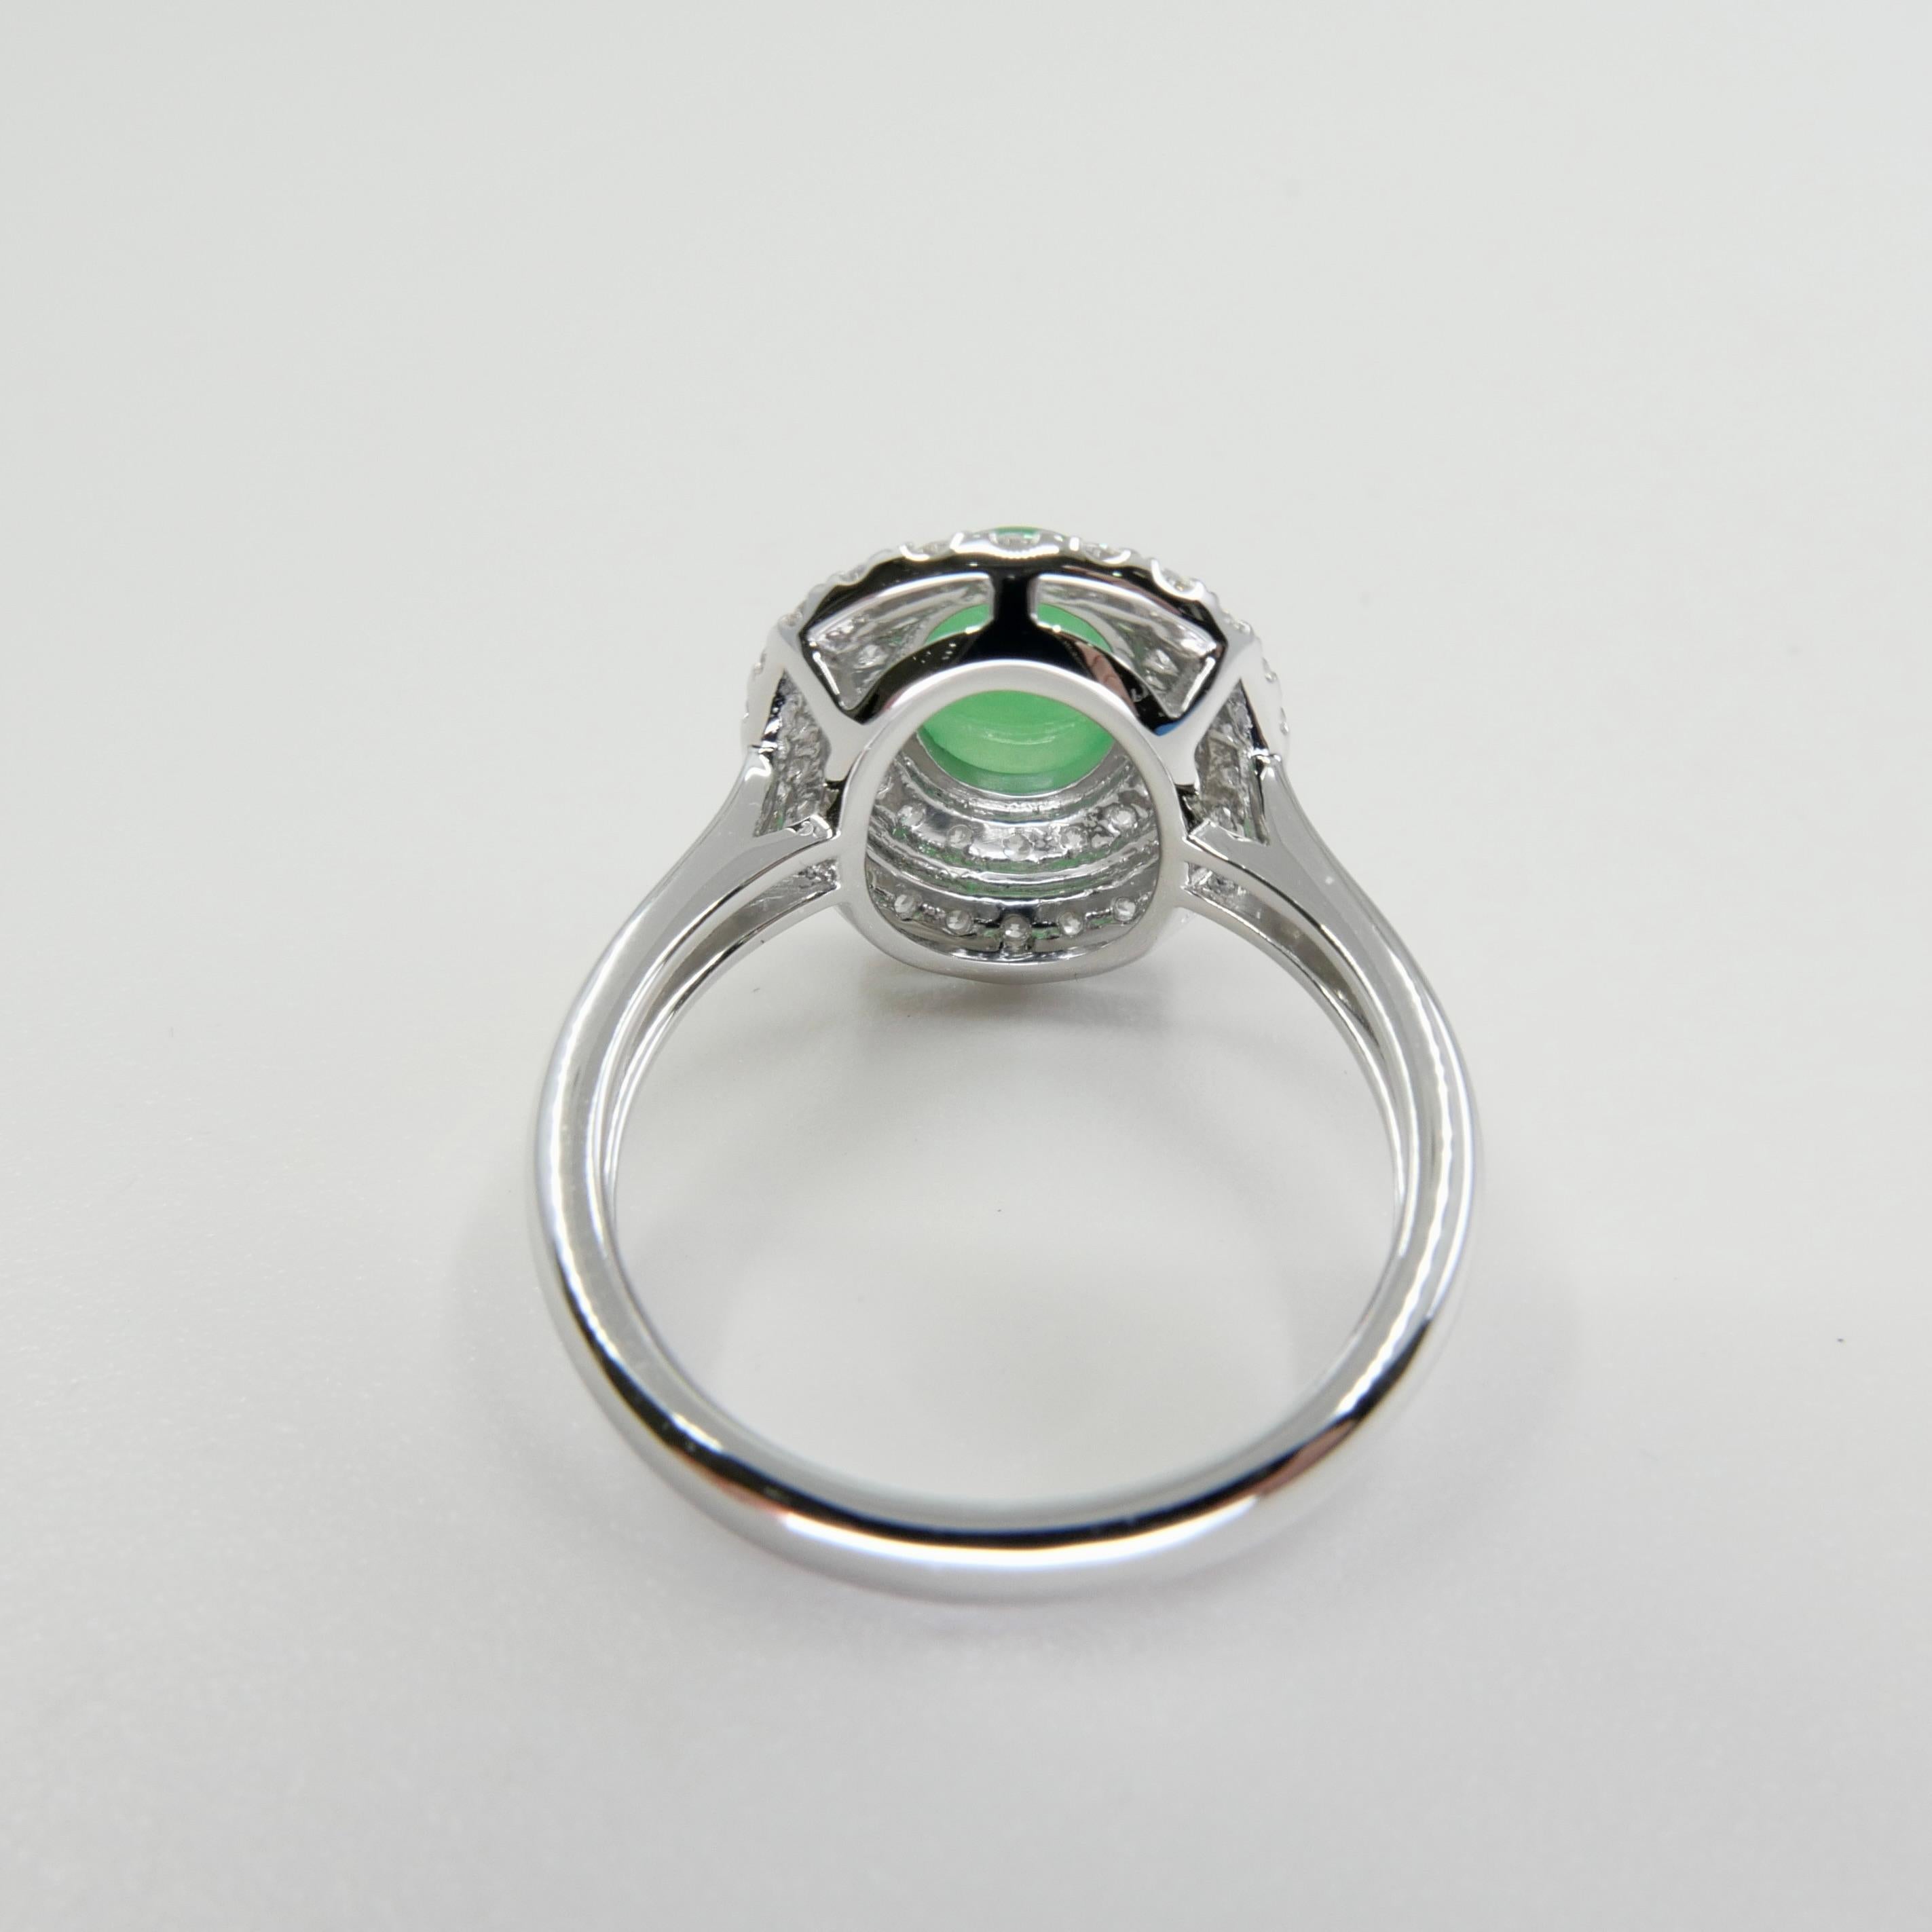 Contemporary Certified 1.59 Carat Natural Jade & Diamond Cocktail Ring, Apple Green Color For Sale